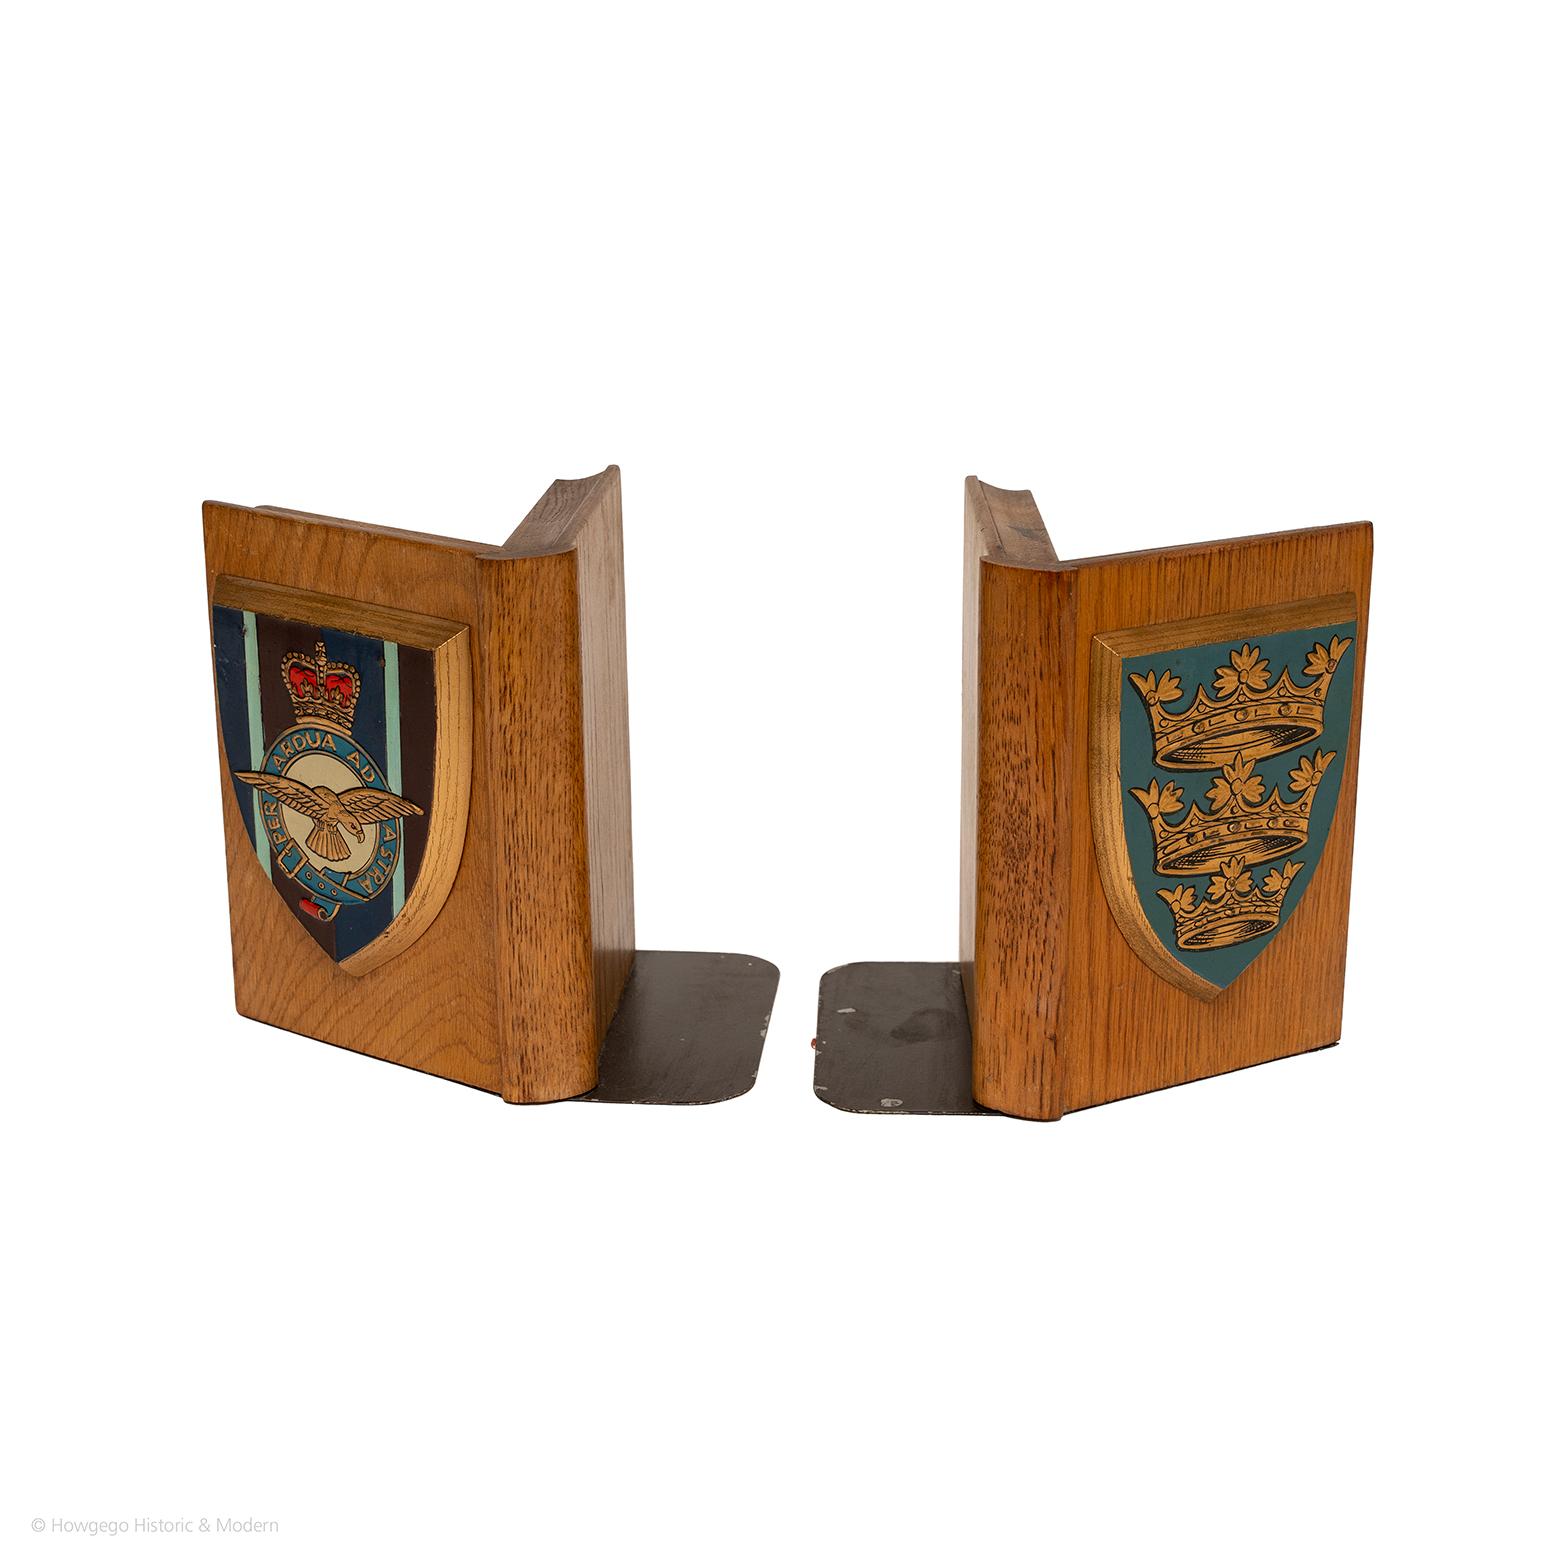 One oak bookend with a polychrome Badge of the Royal Air Force and bearing the motto : Per Ardua ad Astra